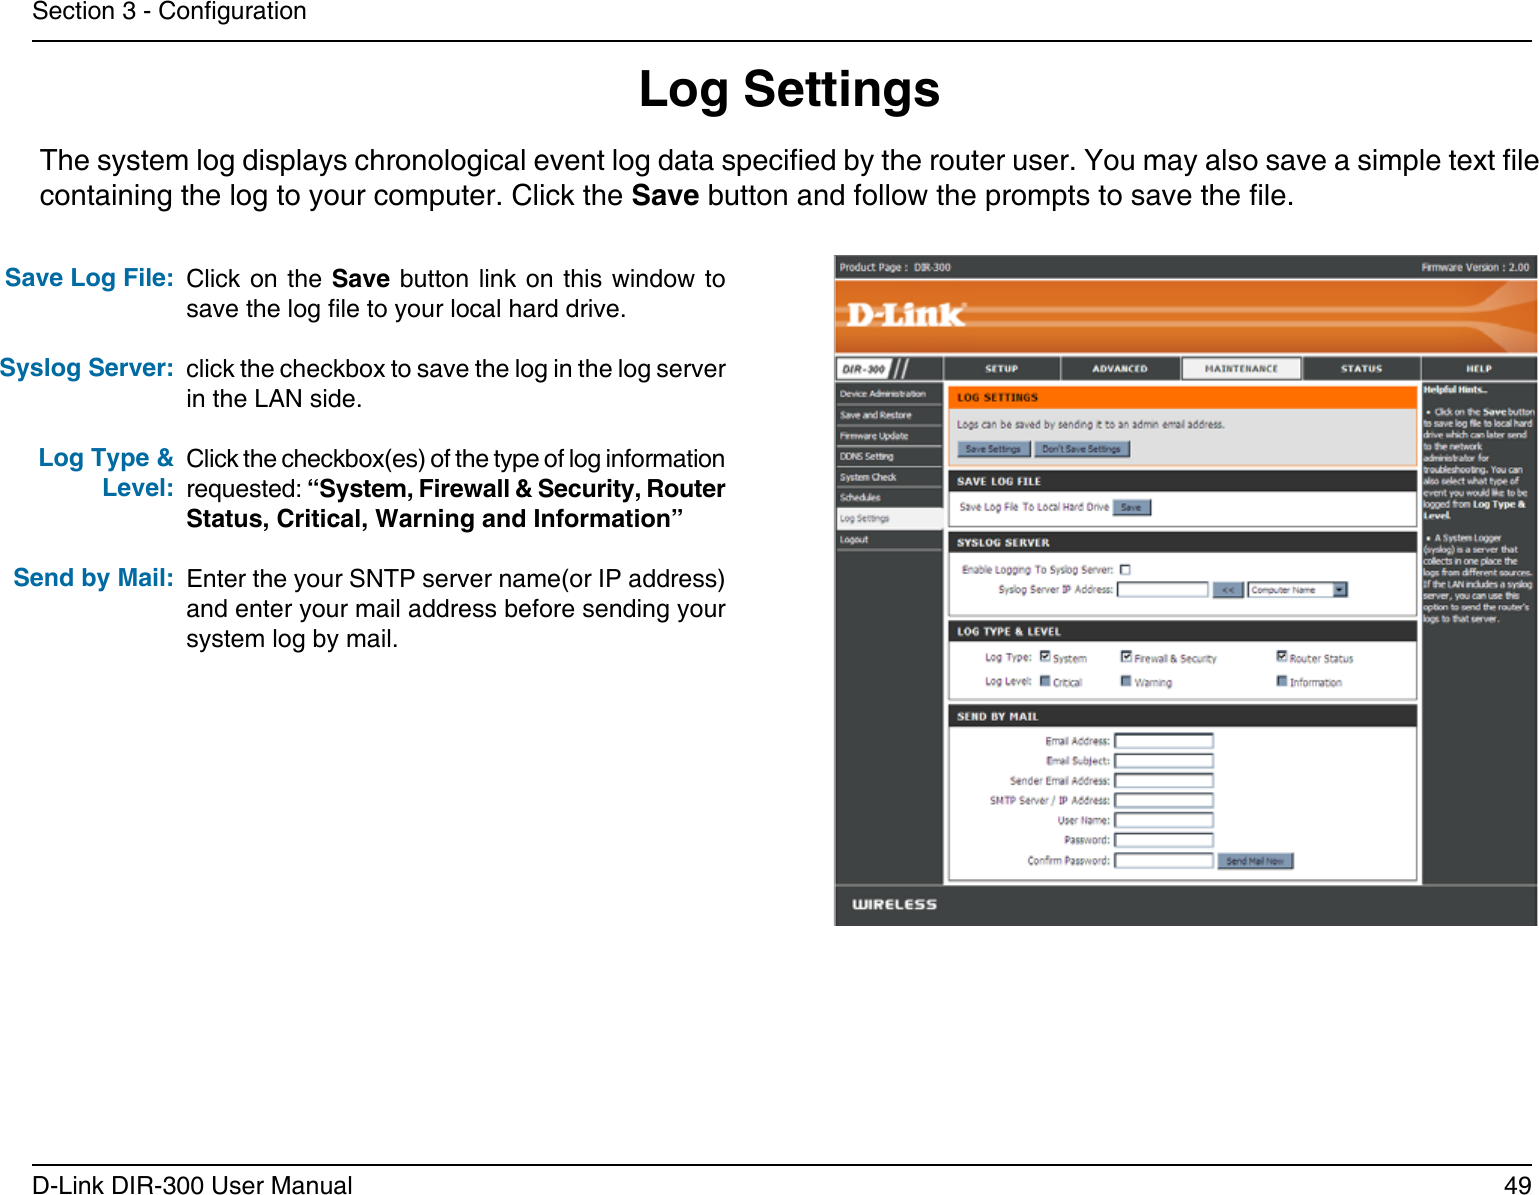 49D-Link DIR-300 User ManualSection 3 - CongurationLog SettingsClick on the Save button link on this  window  to save the log le to your local hard drive.click the checkbox to save the log in the log server in the LAN side.Click the checkbox(es) of the type of log information requested: “System, Firewall &amp; Security, Router Status, Critical, Warning and Information”Enter the your SNTP server name(or IP address) and enter your mail address before sending your system log by mail.Save Log File:Syslog Server:Log Type &amp; Level:Send by Mail:The system log displays chronological event log data specied by the router user. You may also save a simple text le containing the log to your computer. Click the Save button and follow the prompts to save the le.